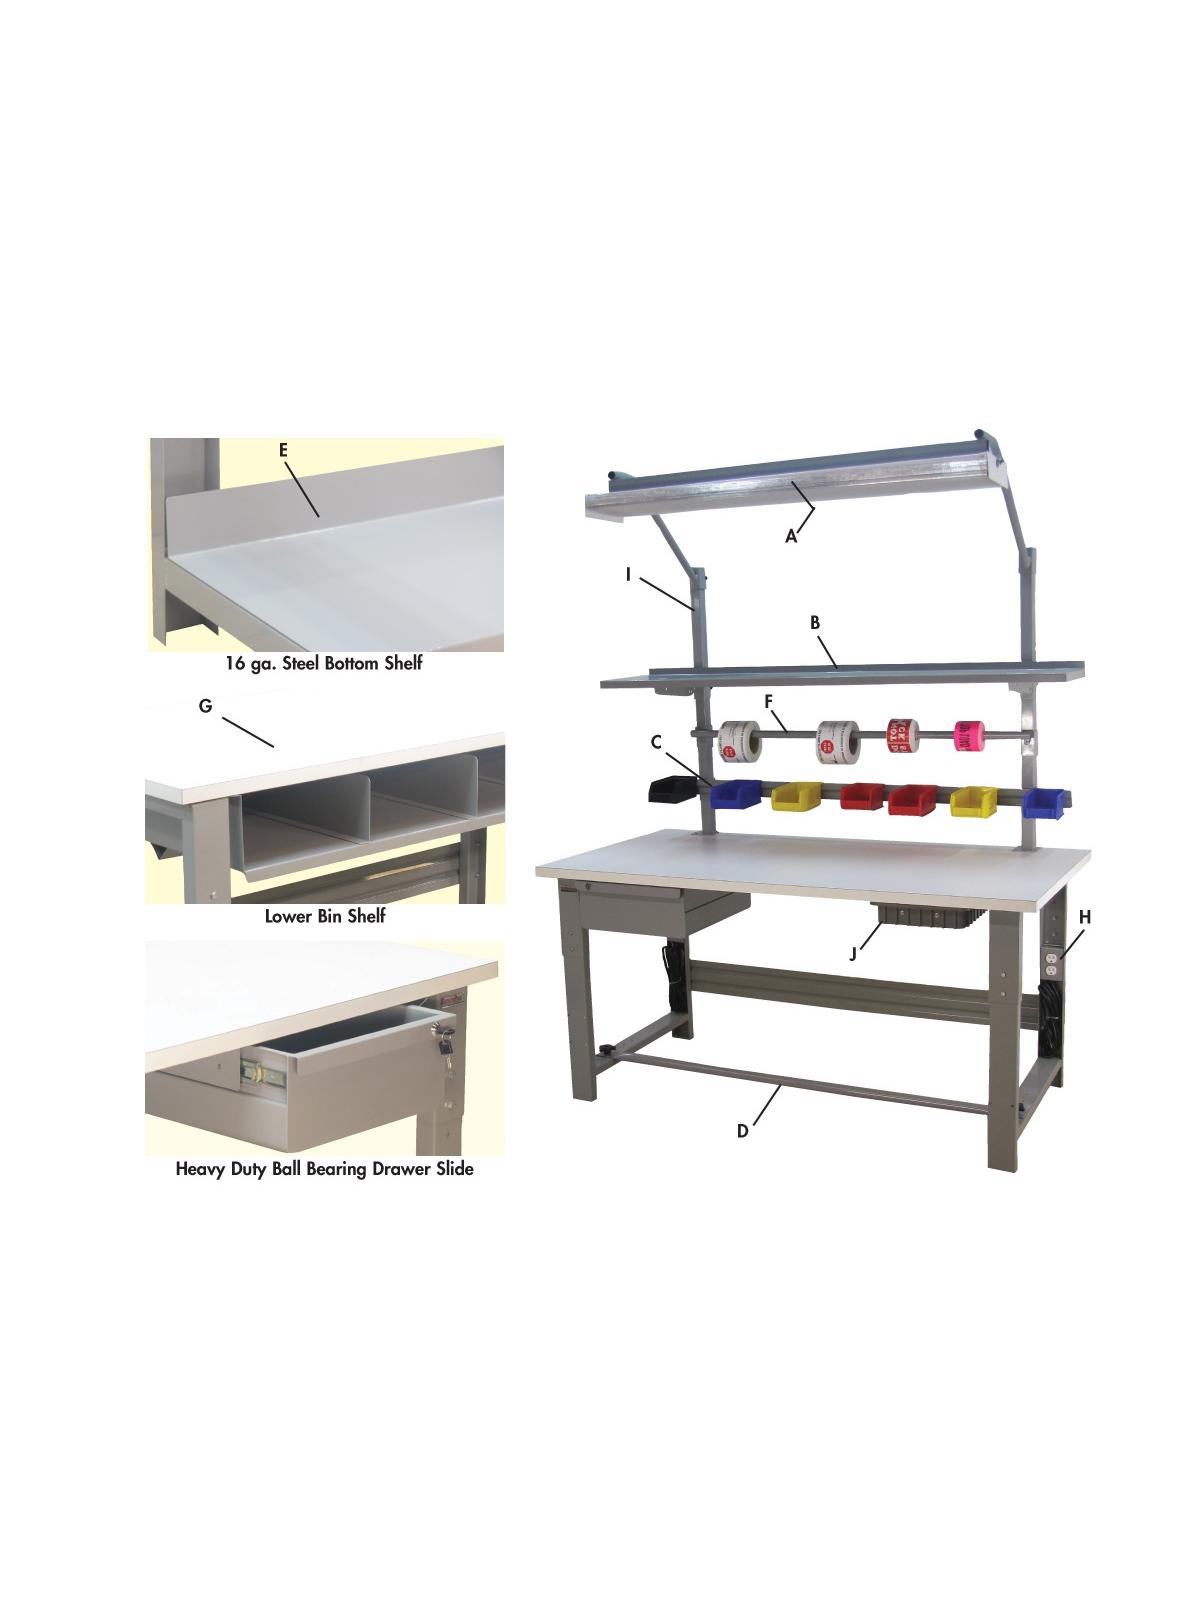 5,000 LB. CAPACITY KENNEDY SERIES WORKBENCHES - WITH HEAVY LISSTATâ„¢ ESD TOP- Gray Top Color, 30 x 96" Size DxL HKD3096-GY, Workbench, work benches, bench, shipping table, table, work table, workstation, work station